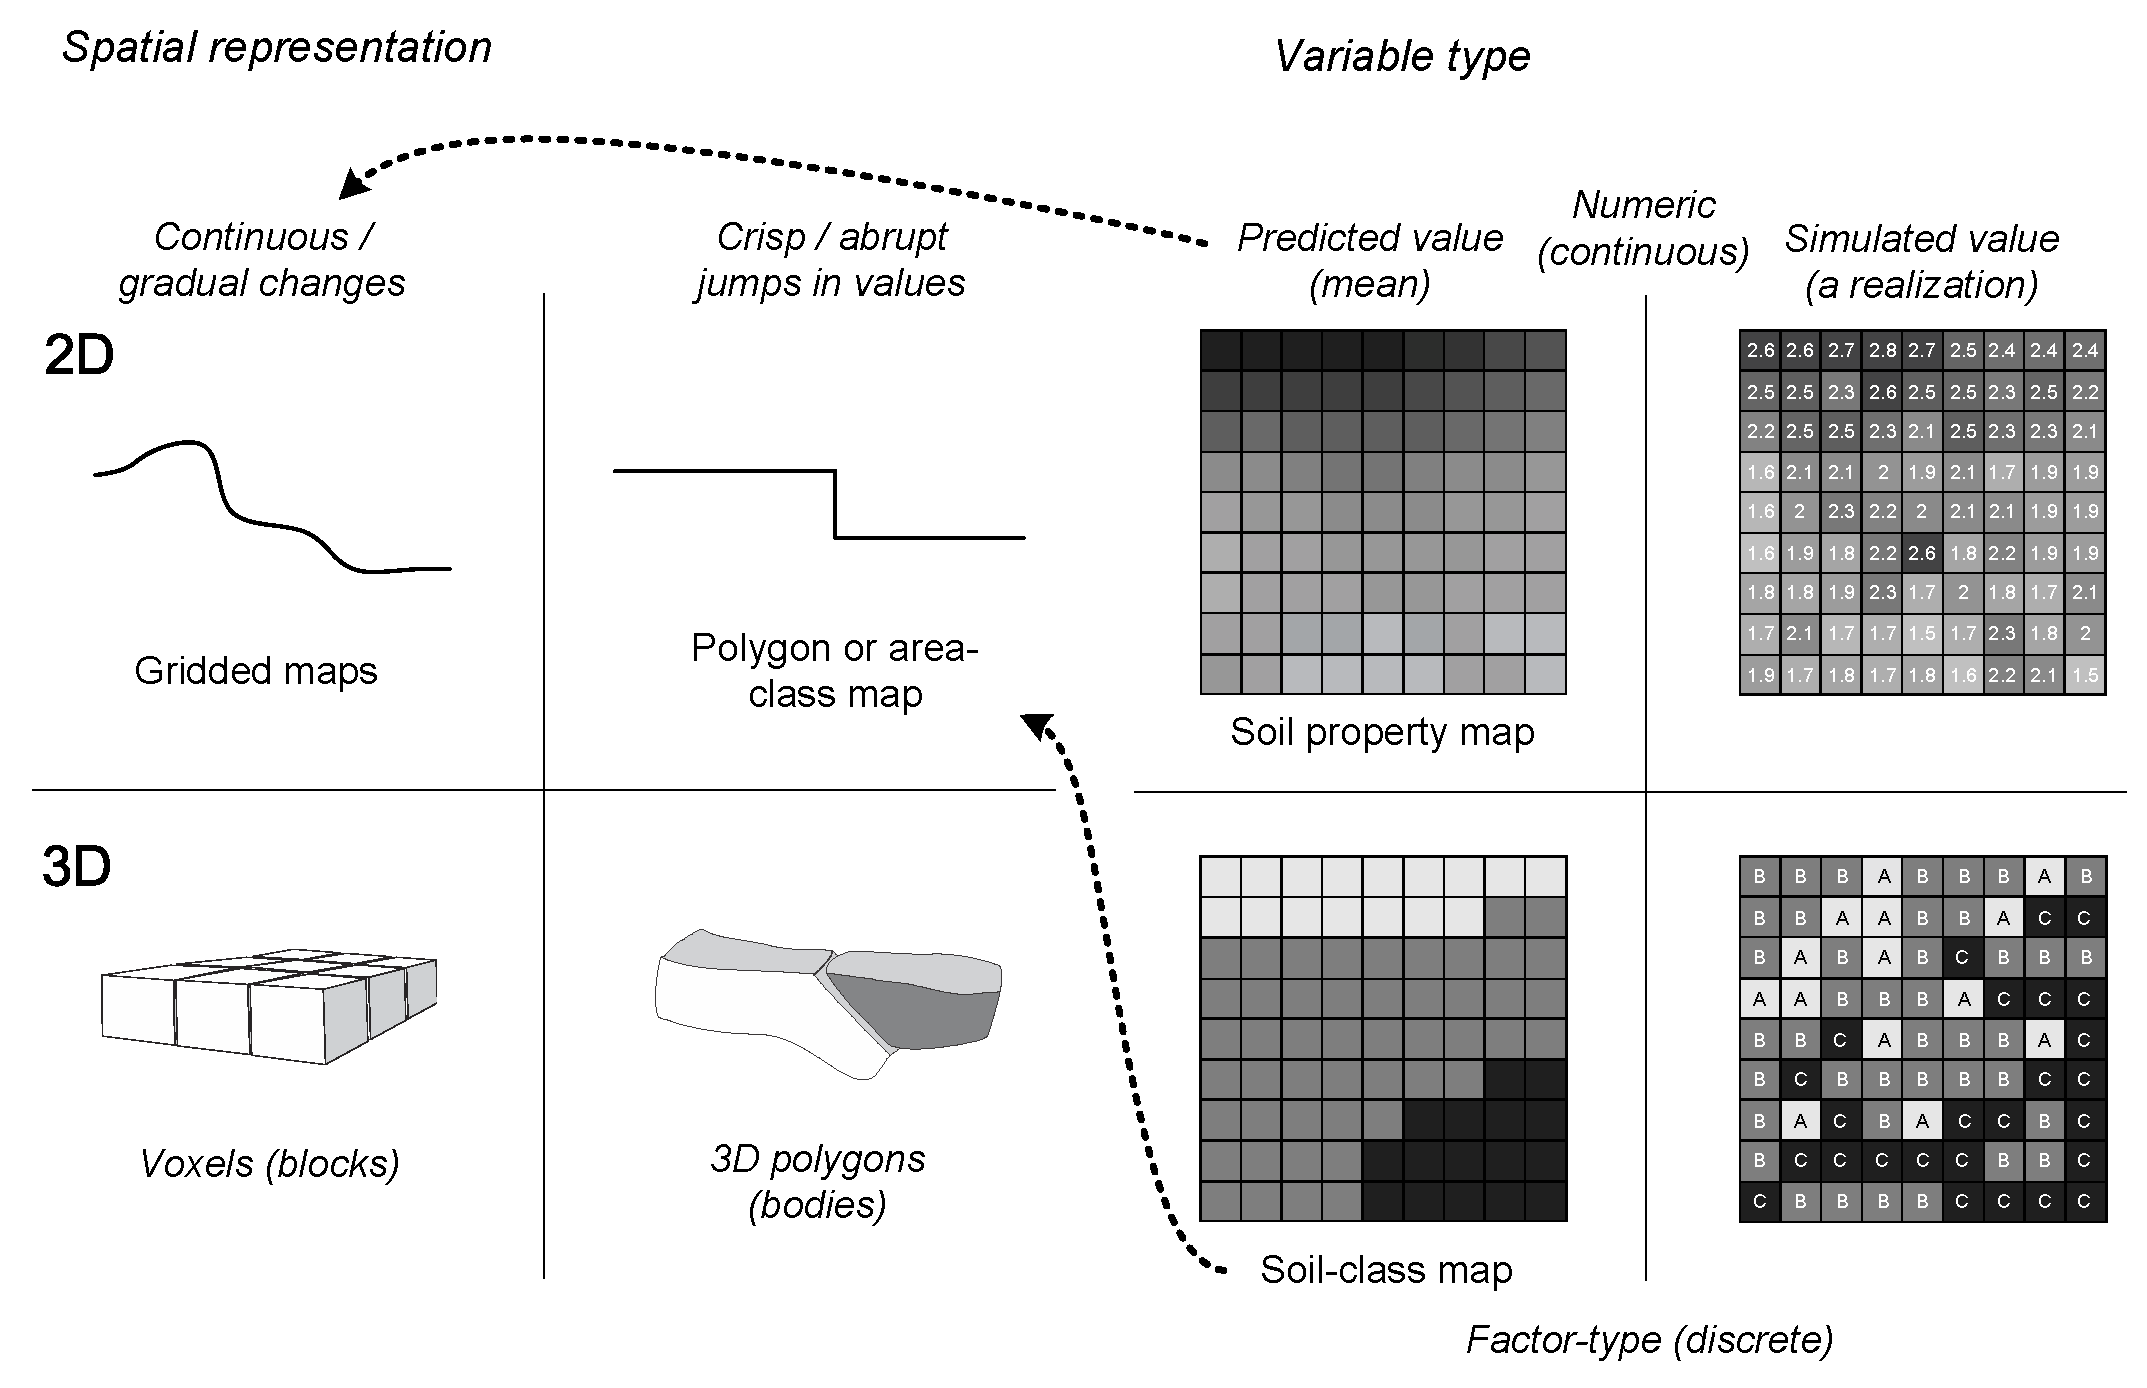 Classification of types of soil maps based on spatial representation and variable type.